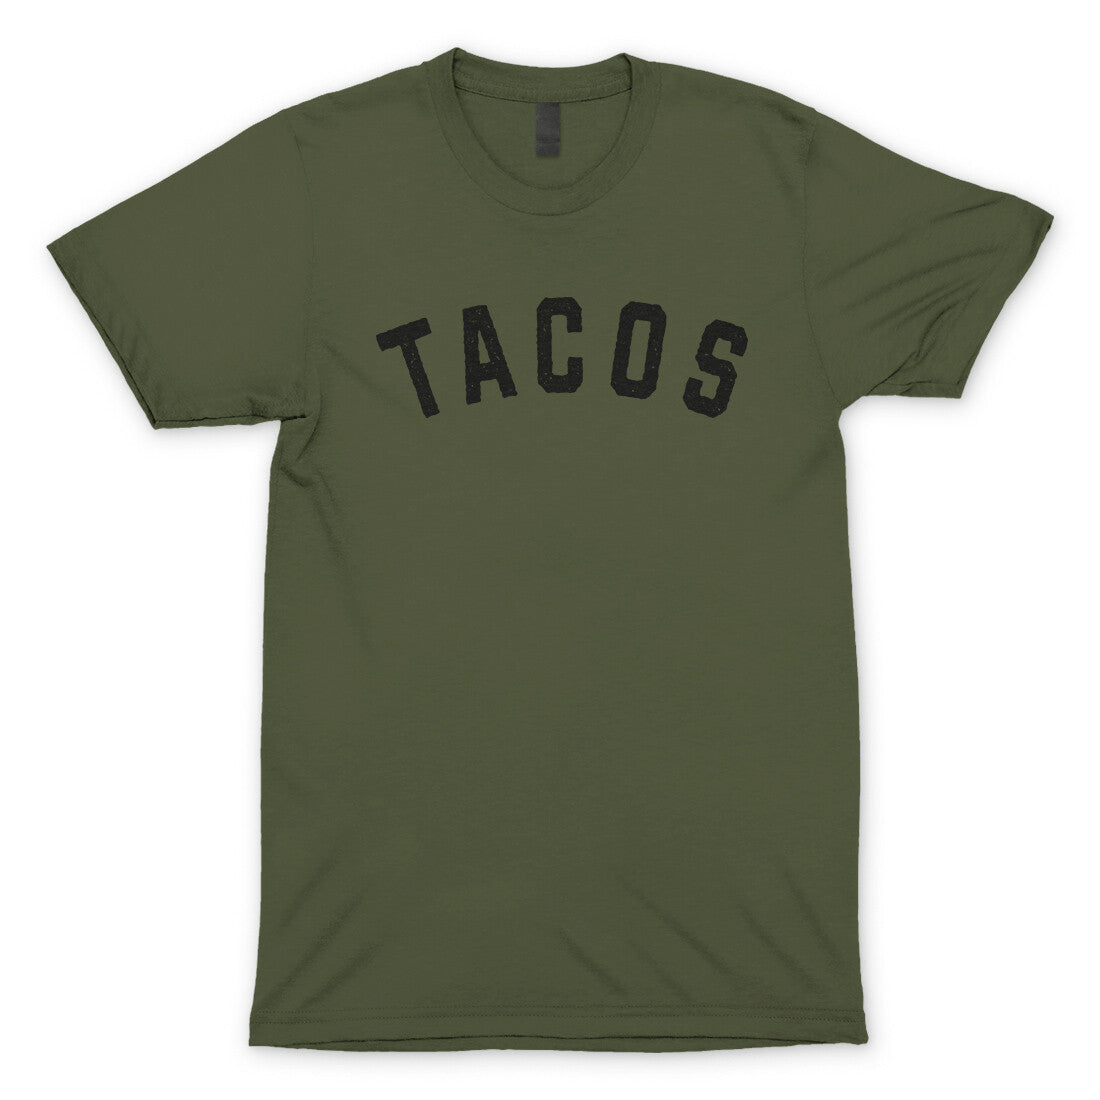 Tacos in Military Green Color